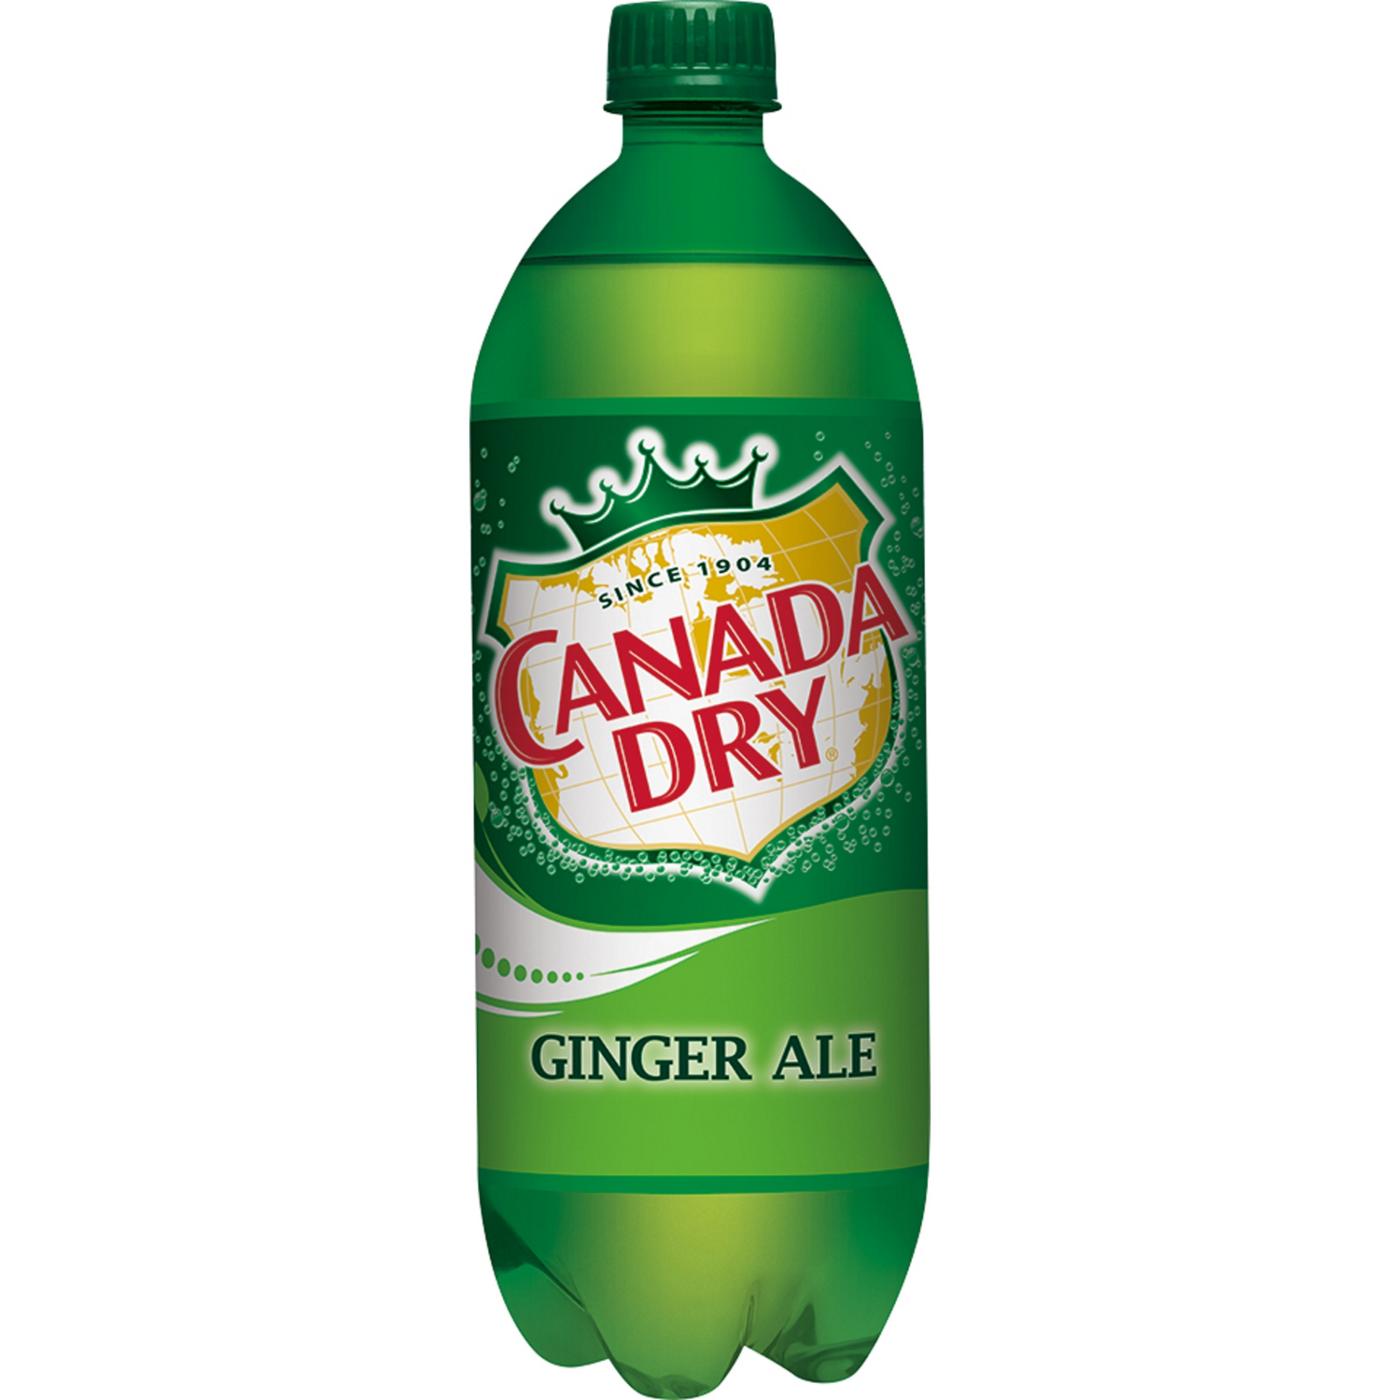 Canada Dry Ginger Ale; image 1 of 2